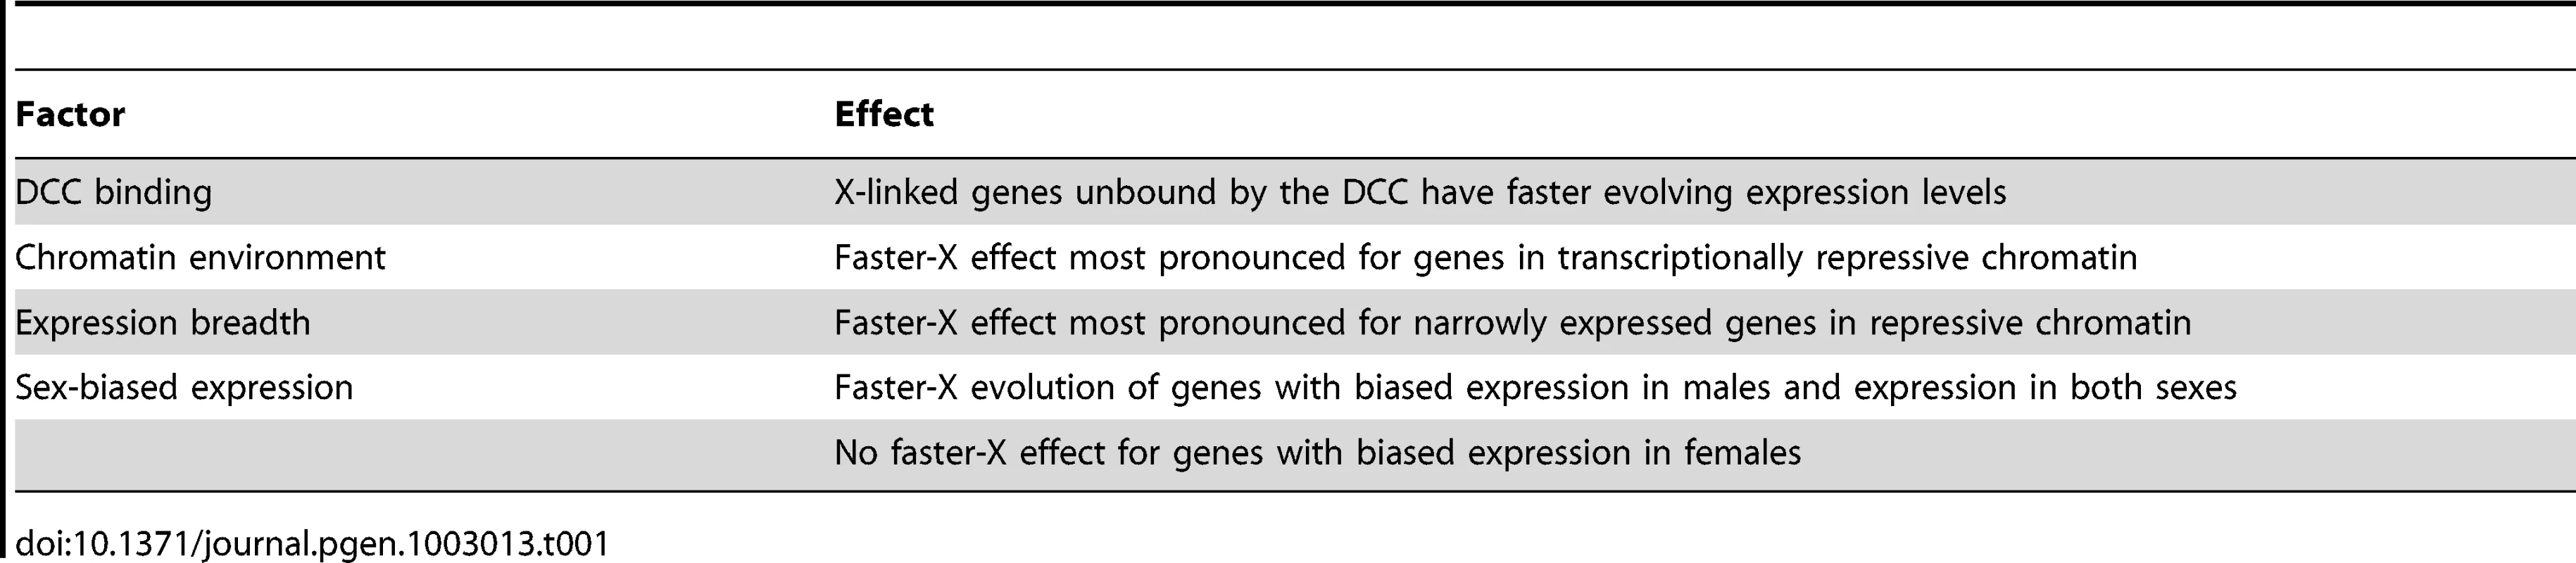 Factors that contribute to the faster-X evolution of gene expression.